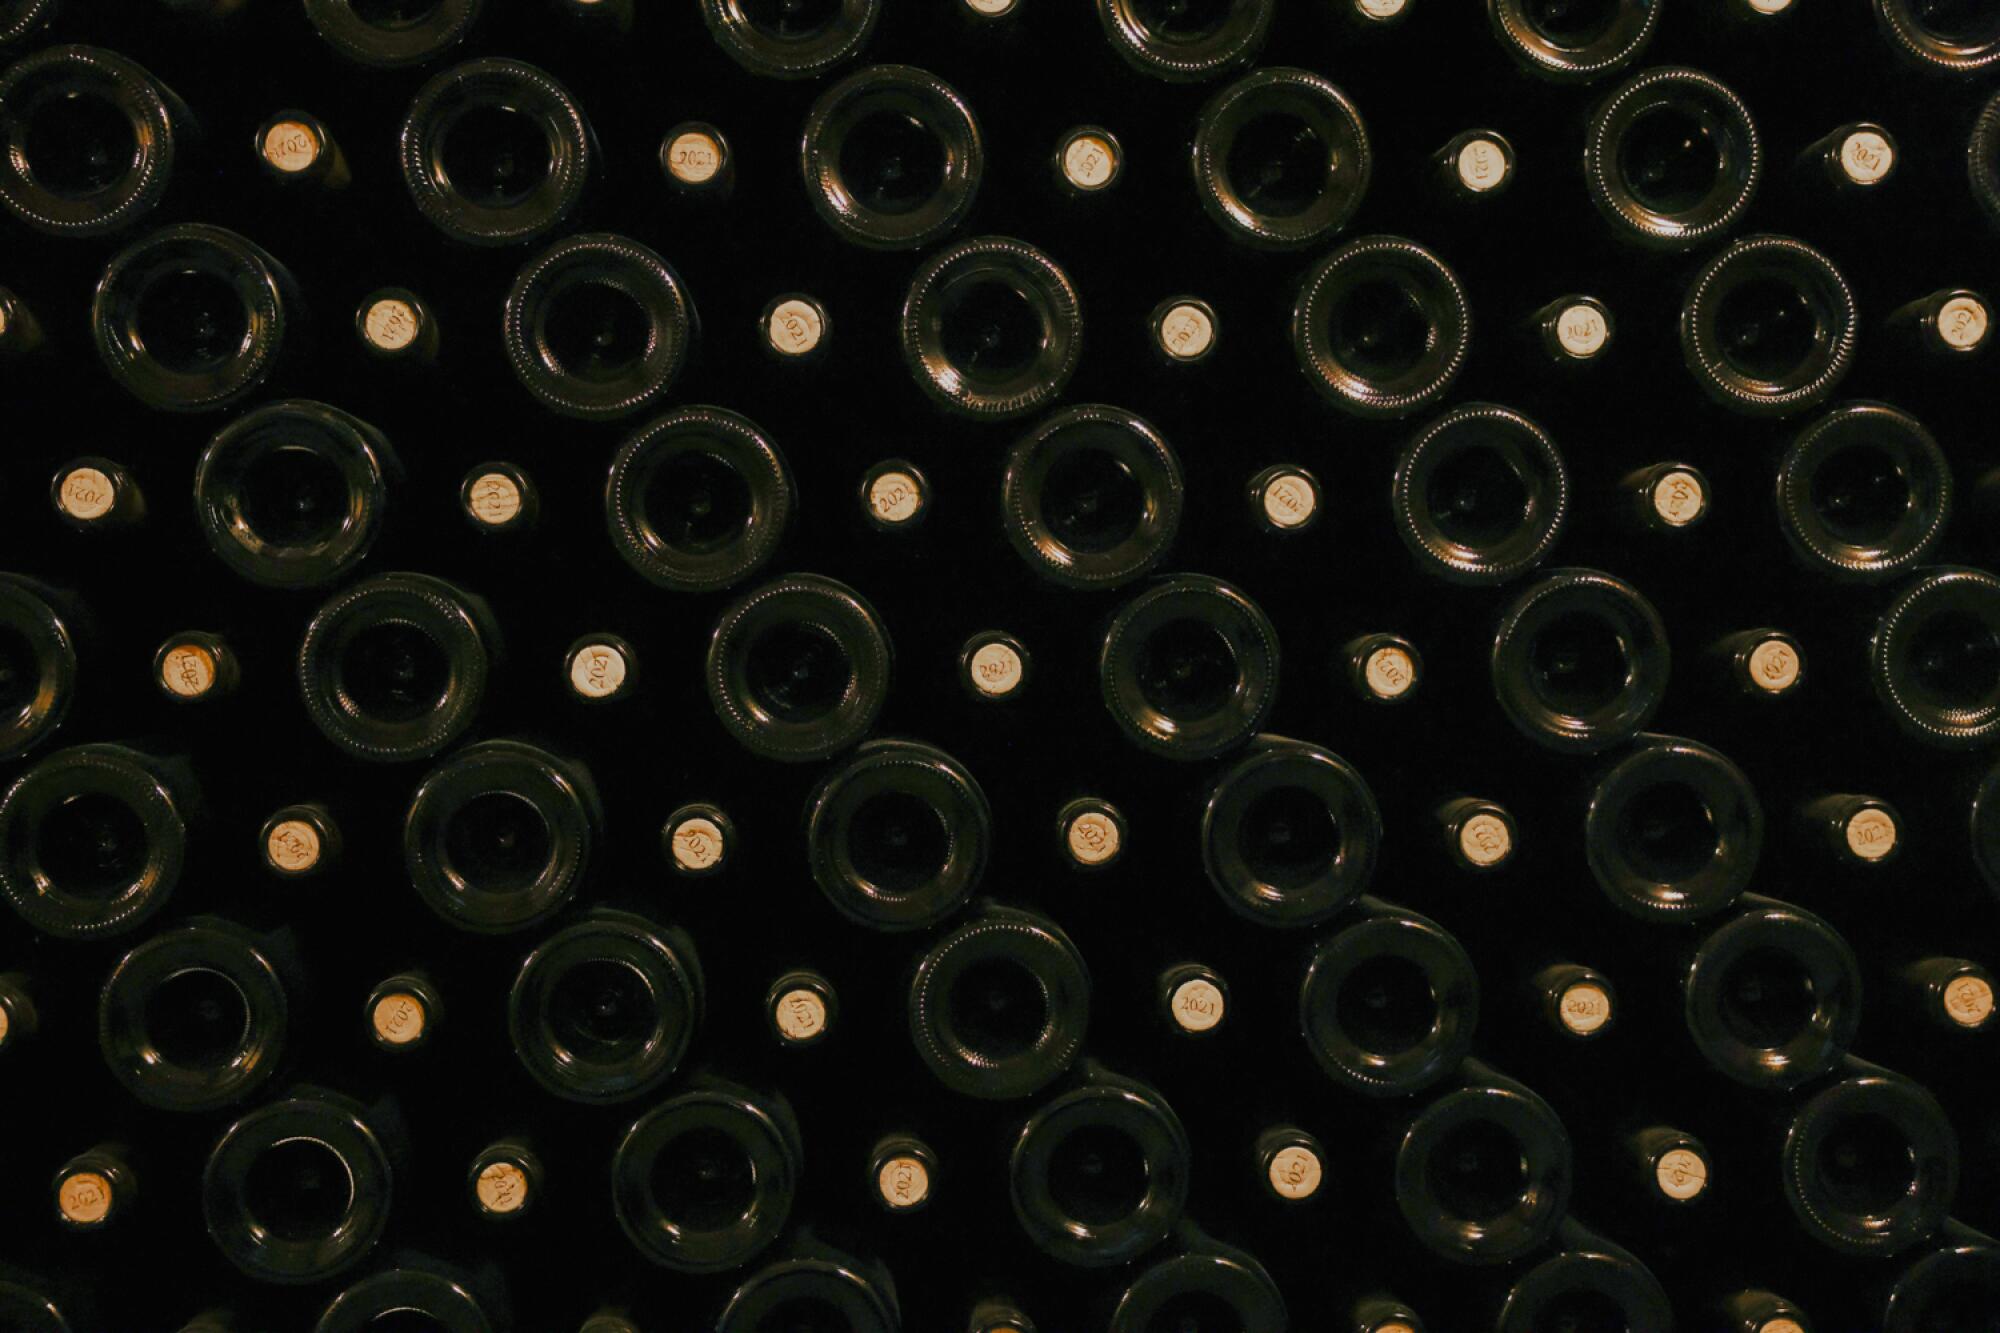 A closeup of wine bottles stacked together.